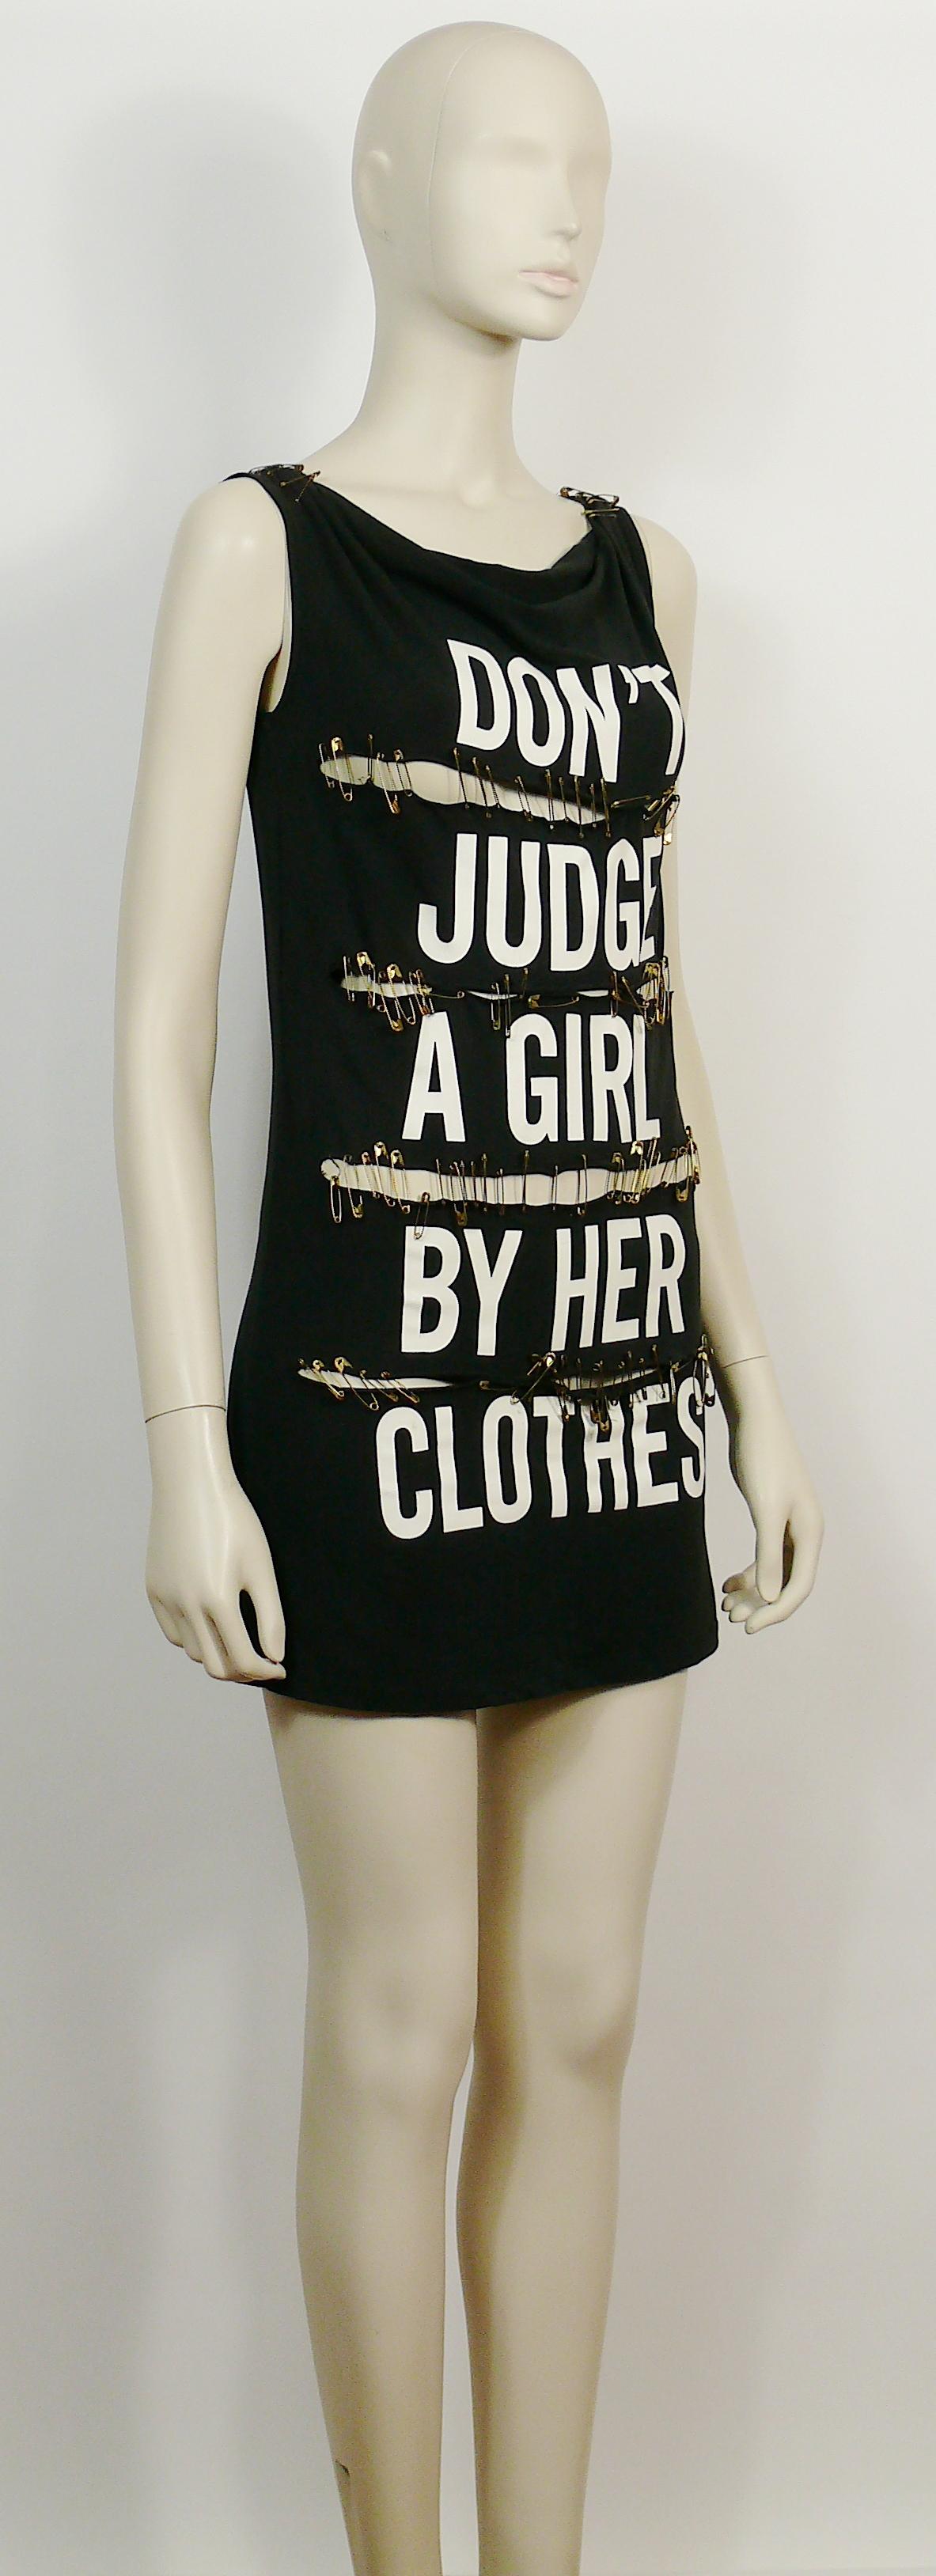 MOSCHINO vintage black cotton blend jersey DON'T JUDGE A GIRL BY HER CLOTHES mini sleeveless dress.

This dress features :
- Black cotton blend jersey.
- Slashed front.
- Cowl neck.
- Gathered shoulders.
- White slogan print 